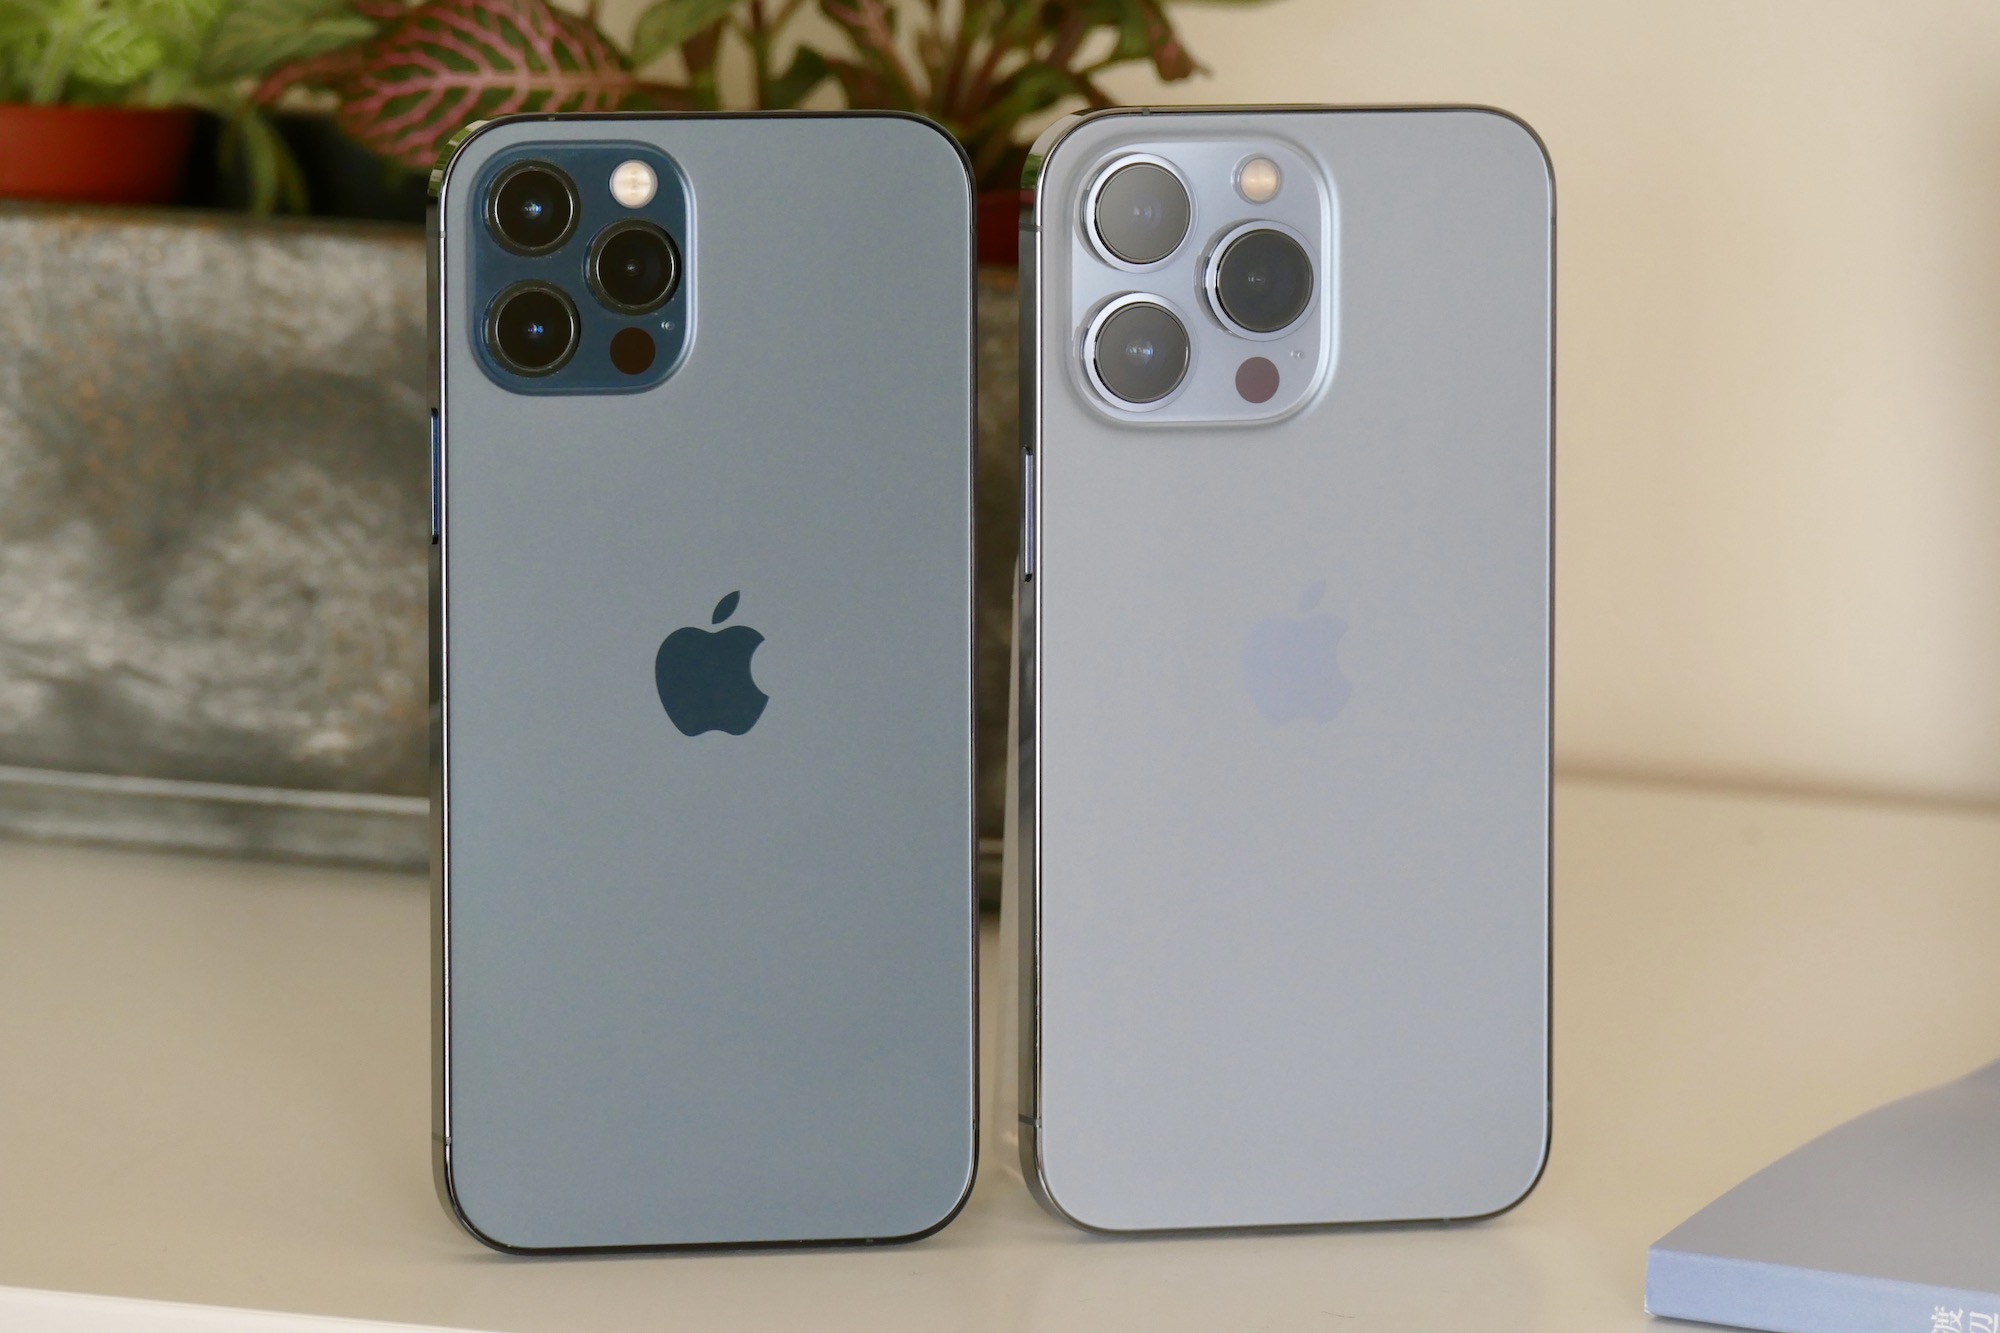  It turns out the iPhone 12 Pro is the iPhone 13 Pros toughest camera rival